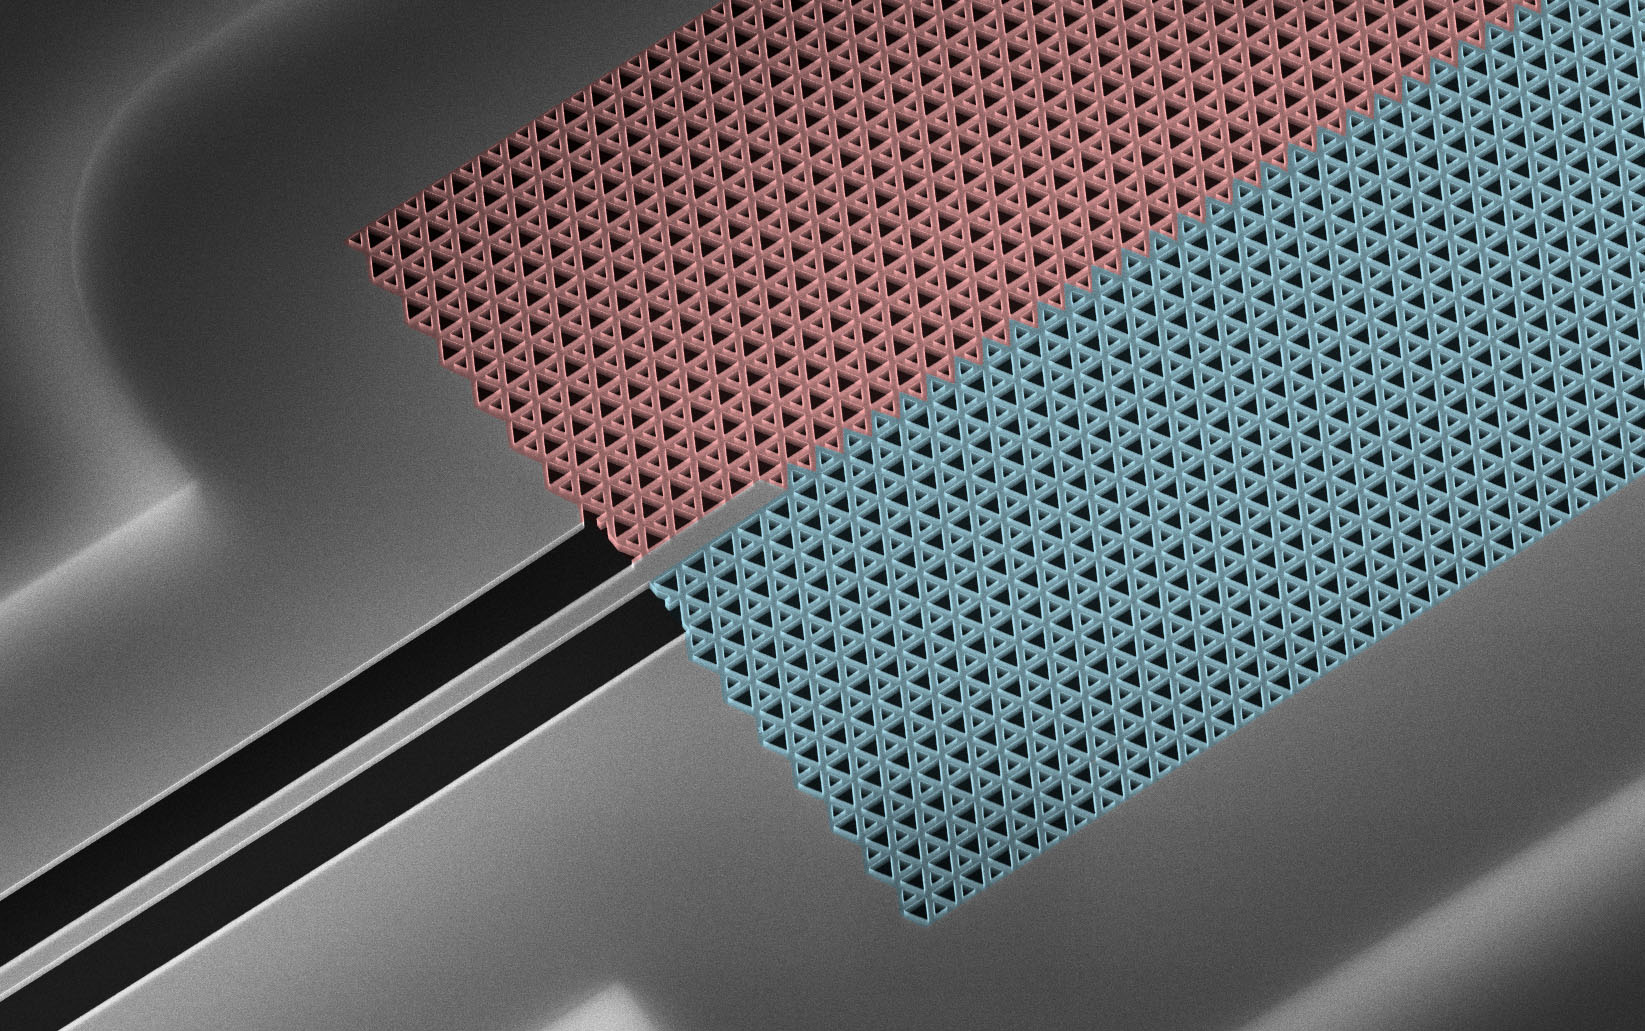 The figure shows a scanning electron microscope image of a photonic waveguide